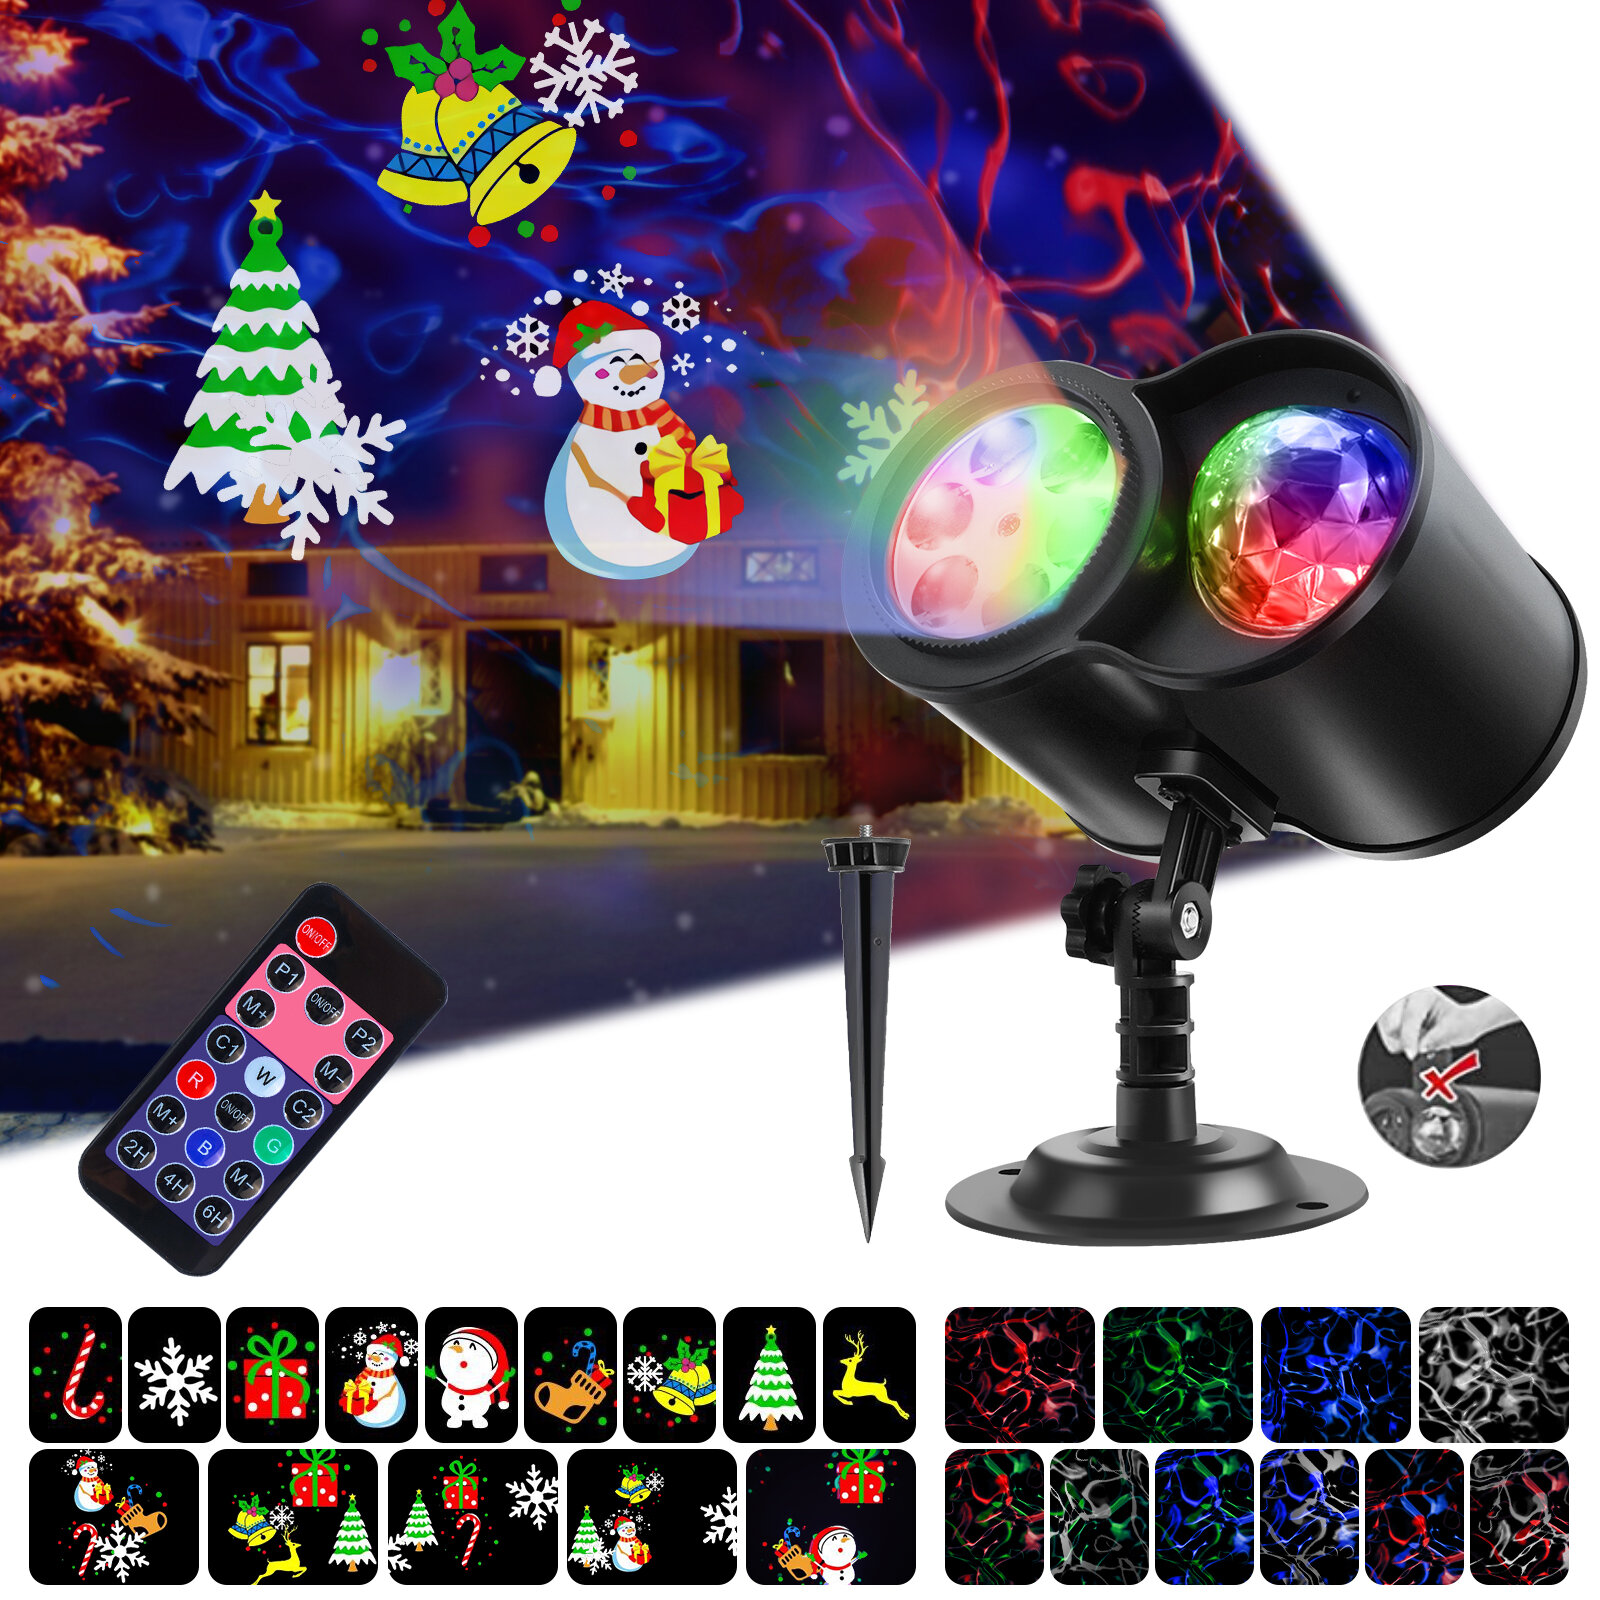 best price,sgodde,6w,projection,light,for,christmas,eu,discount